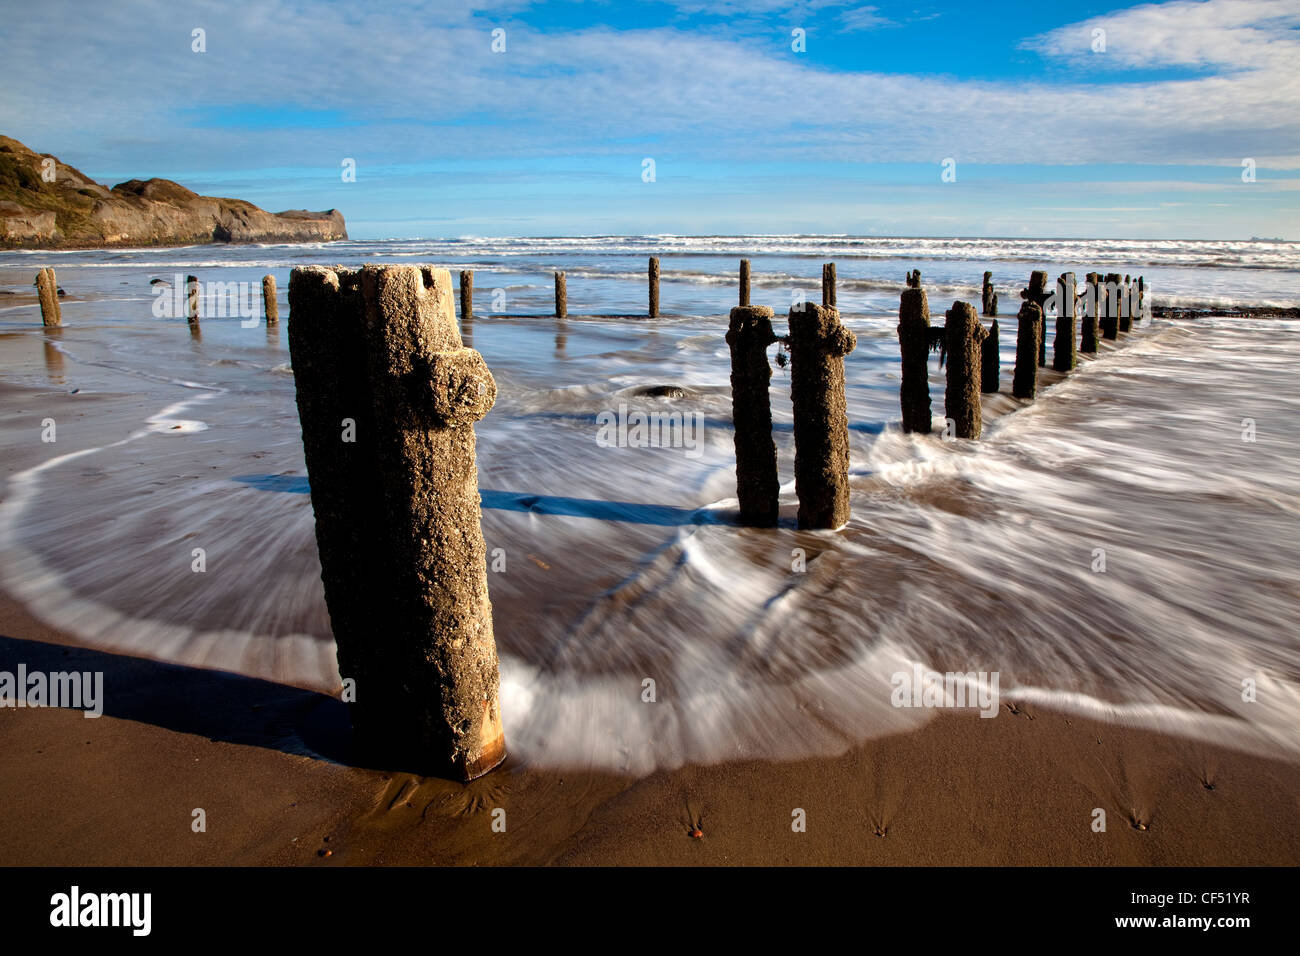 Waves from the North sea washing onto the shore around Groynes on Sandsend beach near Whitby on the North Yorkshire Coast. Stock Photo